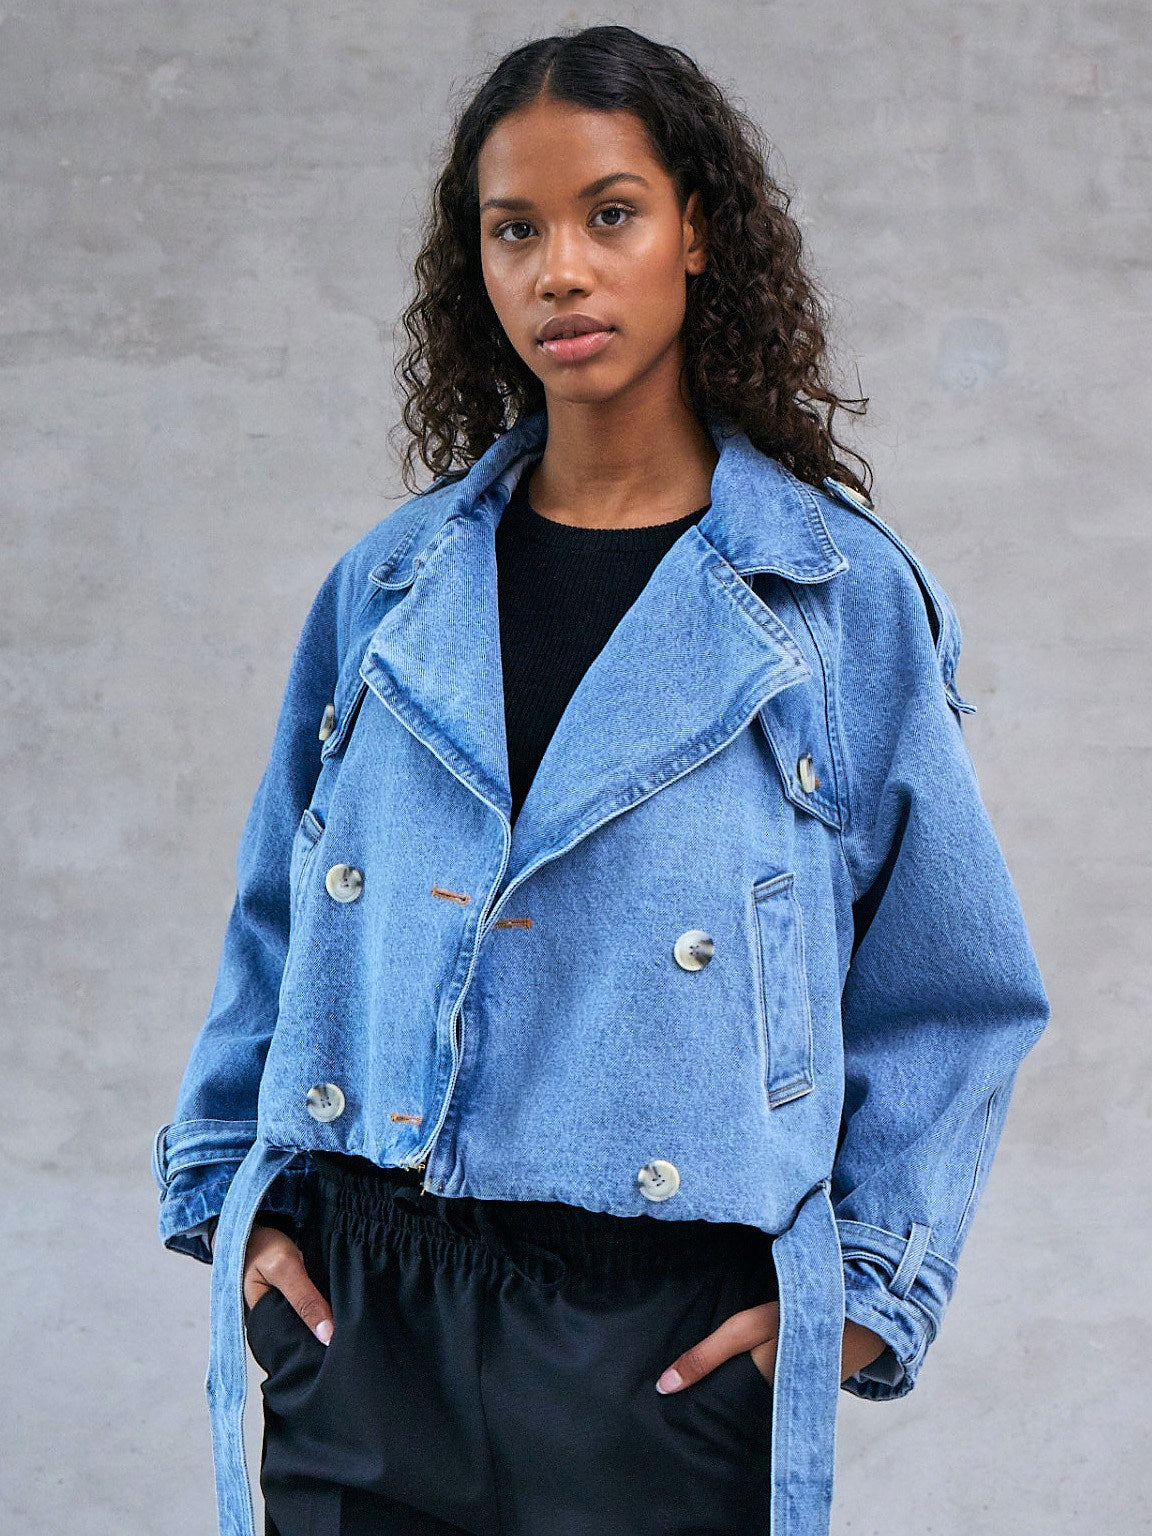 HOW TO STYLE DOUBLE DENIM | Off The Cuff